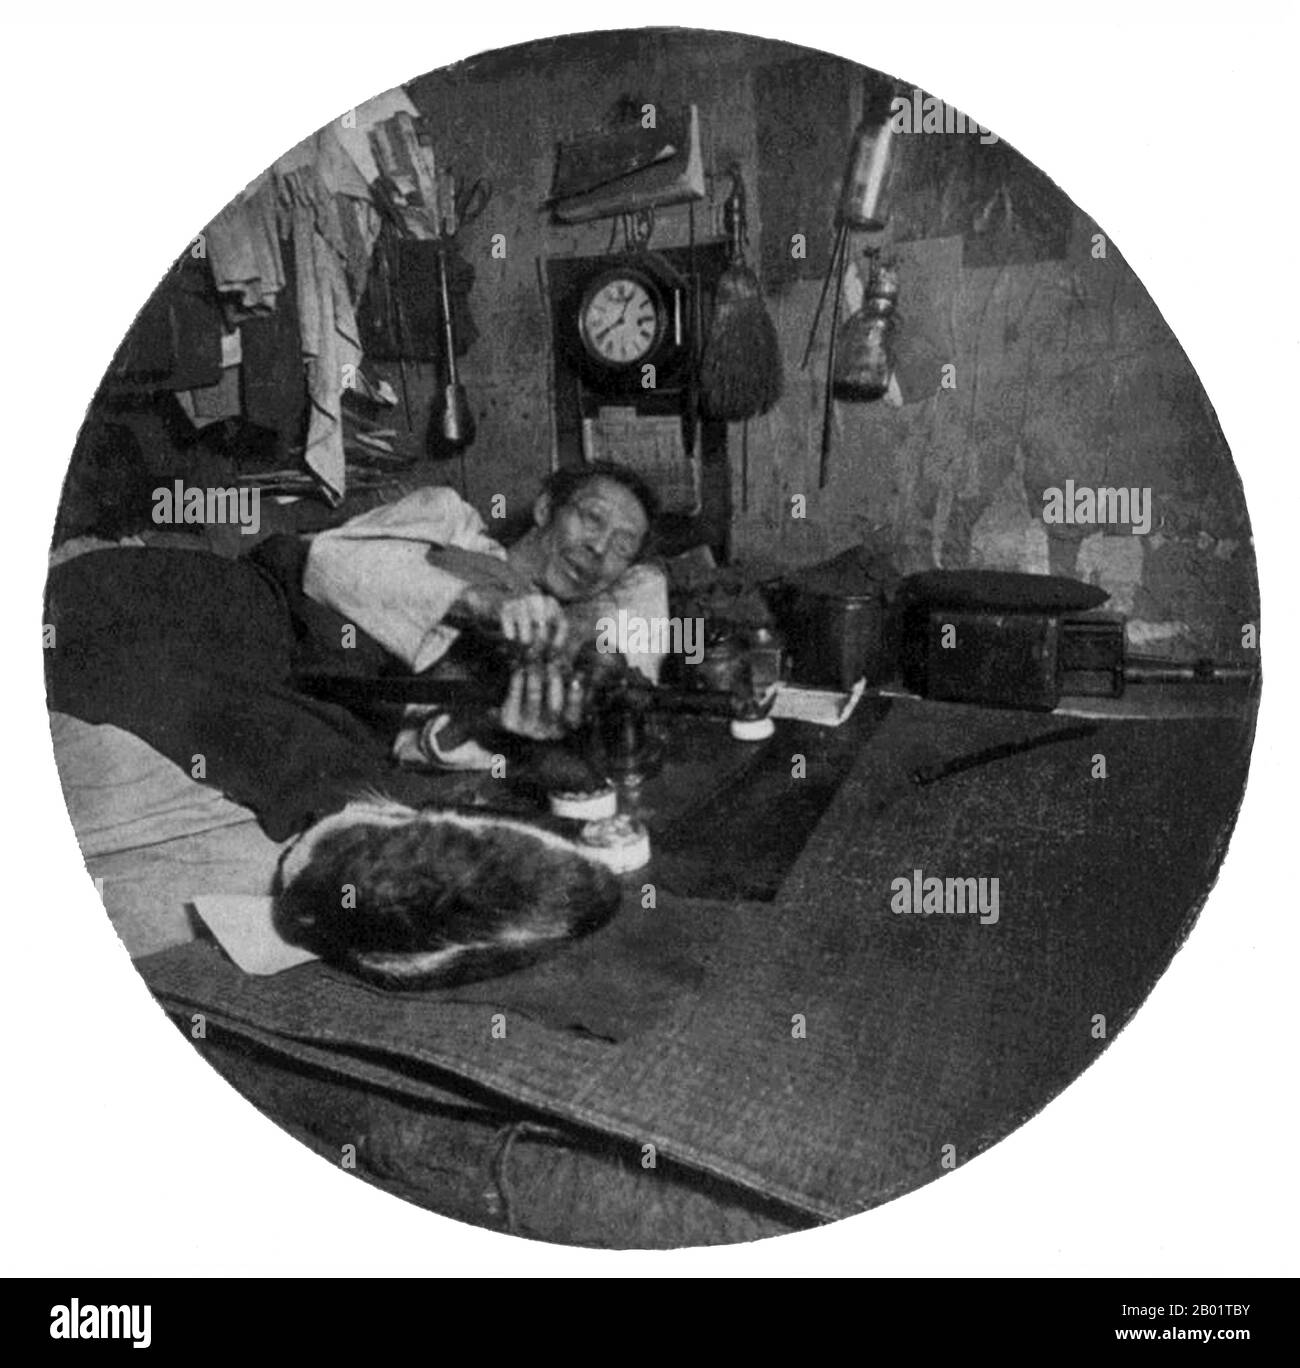 USA: Man smoking in an opium den. San Francisco Chinatown, c. 1895.  San Francisco's Chinatown was the port of entry for early Hoisanese and Zhongshanese Chinese immigrants from the Guangdong province of southern China from the 1850s to the 1900s. The area was the one geographical region deeded by the city government and private property owners which allowed Chinese persons to inherit and inhabit dwellings within the city.  The majority of these Chinese shopkeepers, restaurant owners, and hired workers in San Francisco Chinatown were predominantly Hoisanese and male. Stock Photo